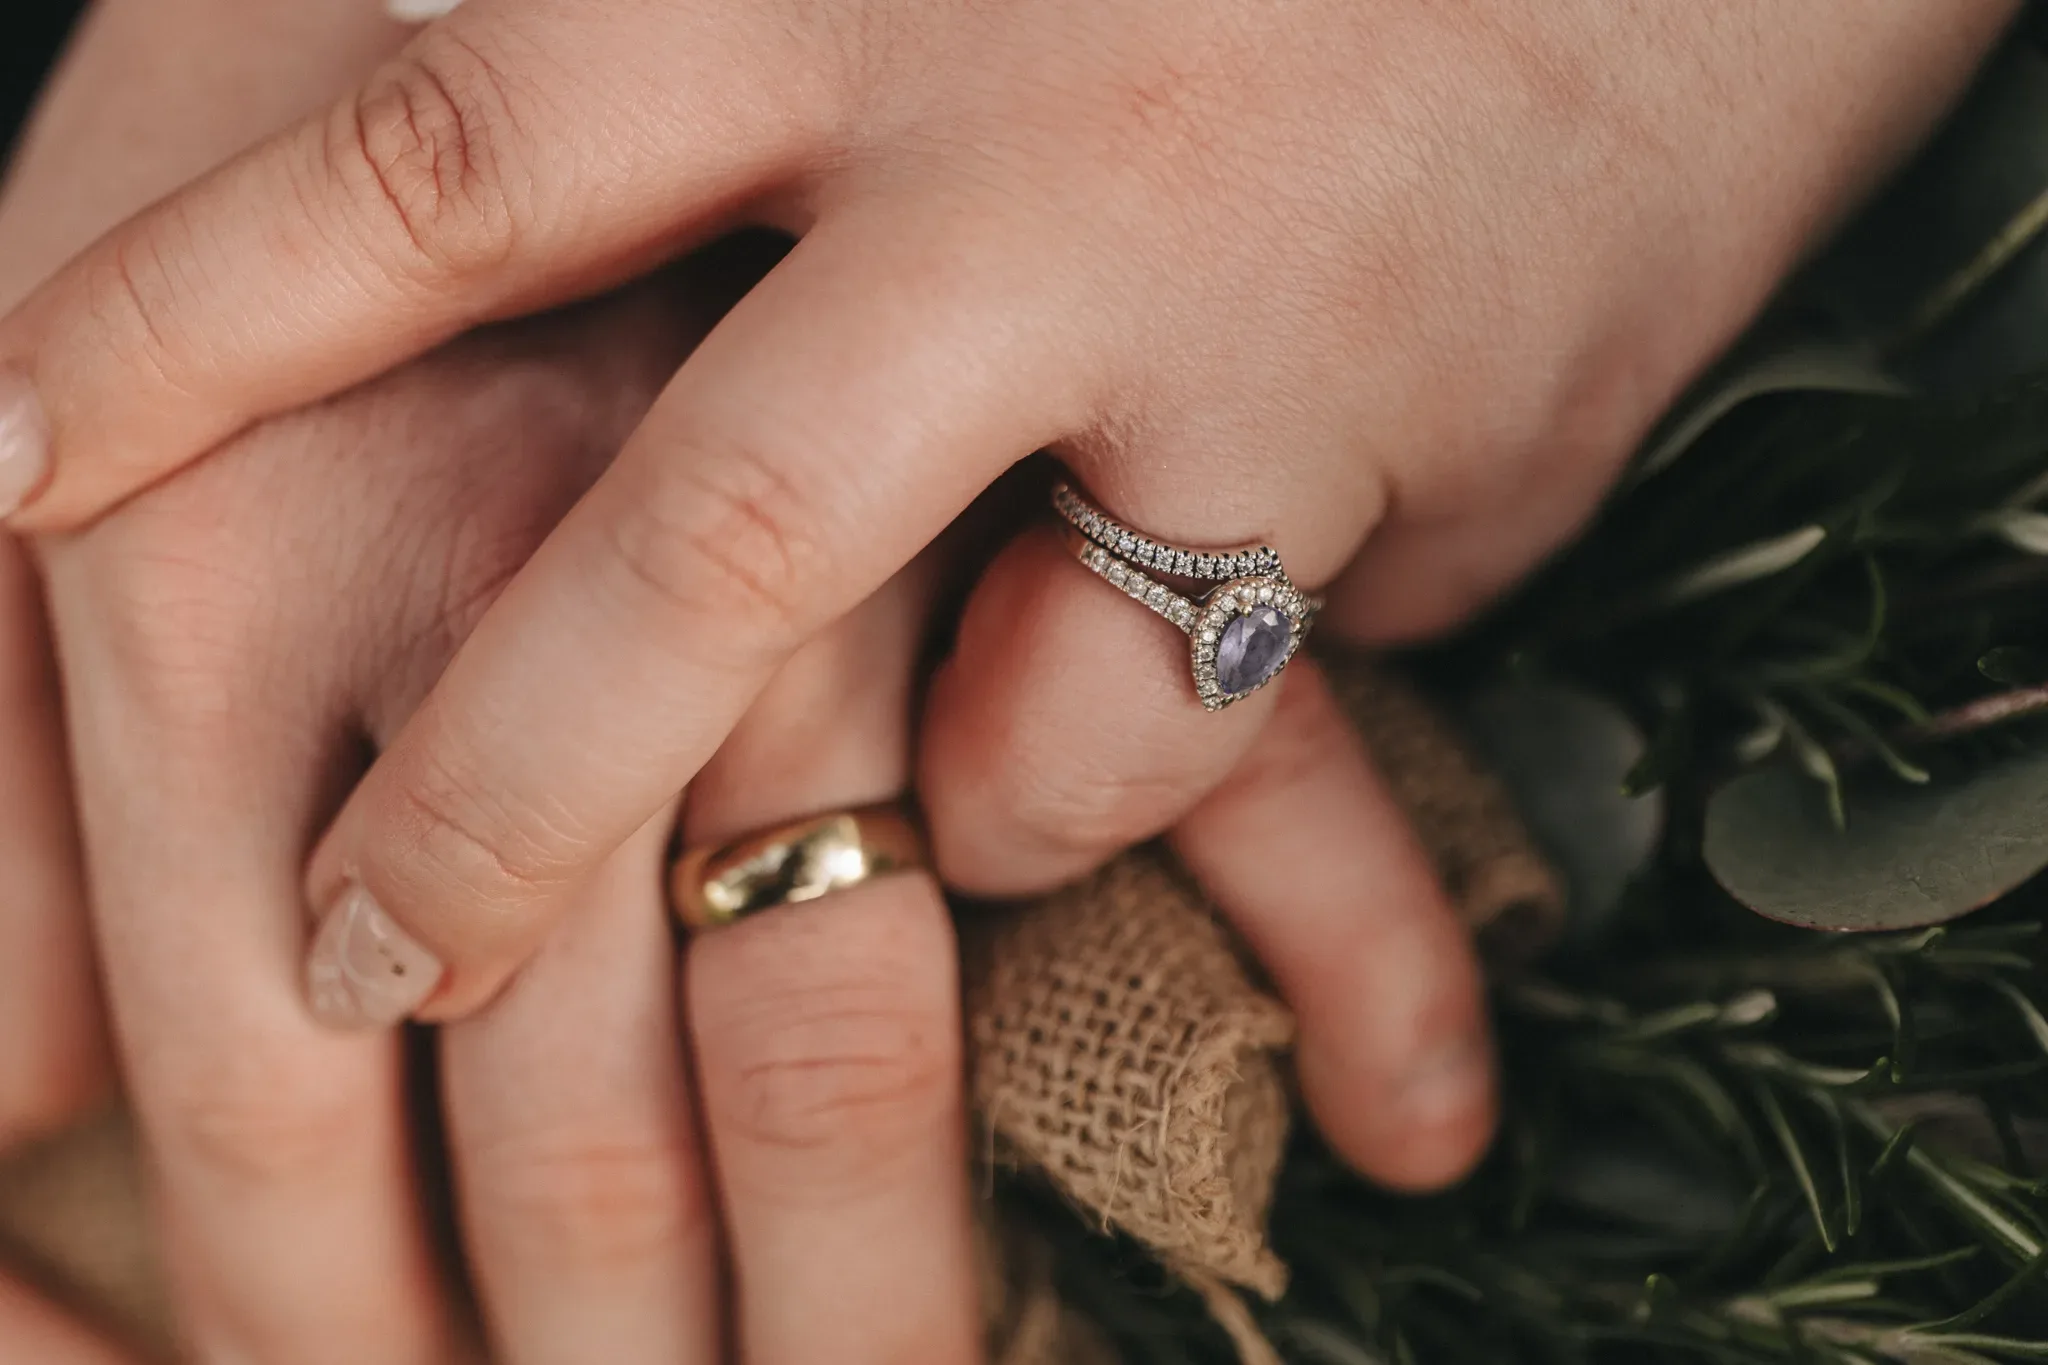 Close-up of a couple's hands gently touching, showcasing their wedding rings. the woman's ring has a prominent purple gemstone surrounded by smaller diamonds, while the man's is a simple gold band.